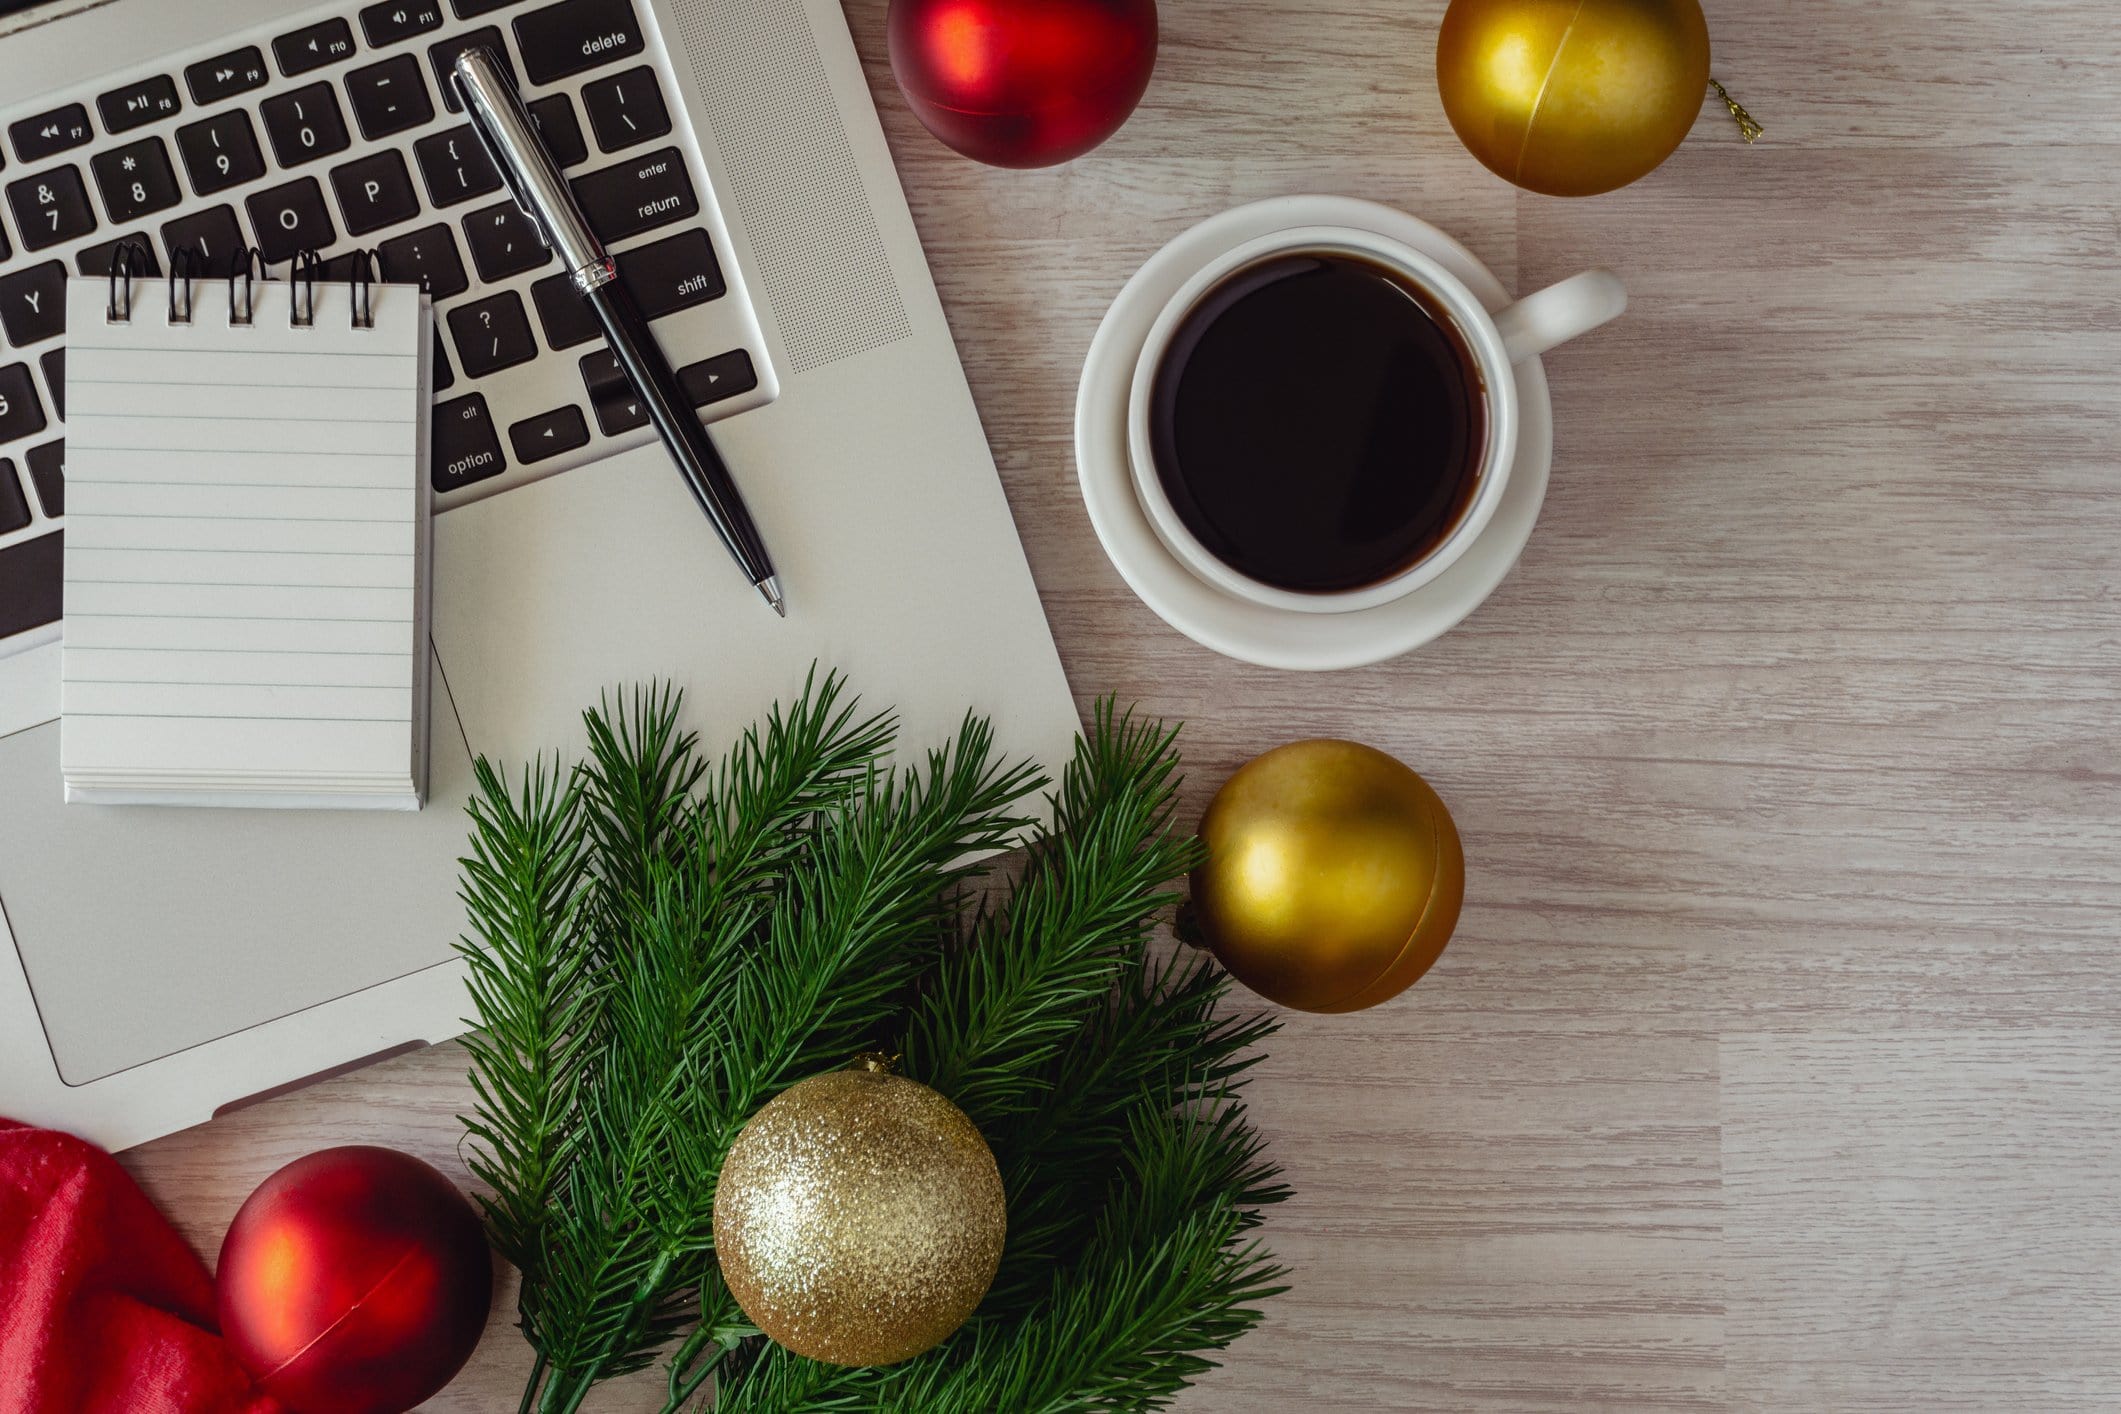 Productivity Hacks: How to Concentrate at Work During the Holidays